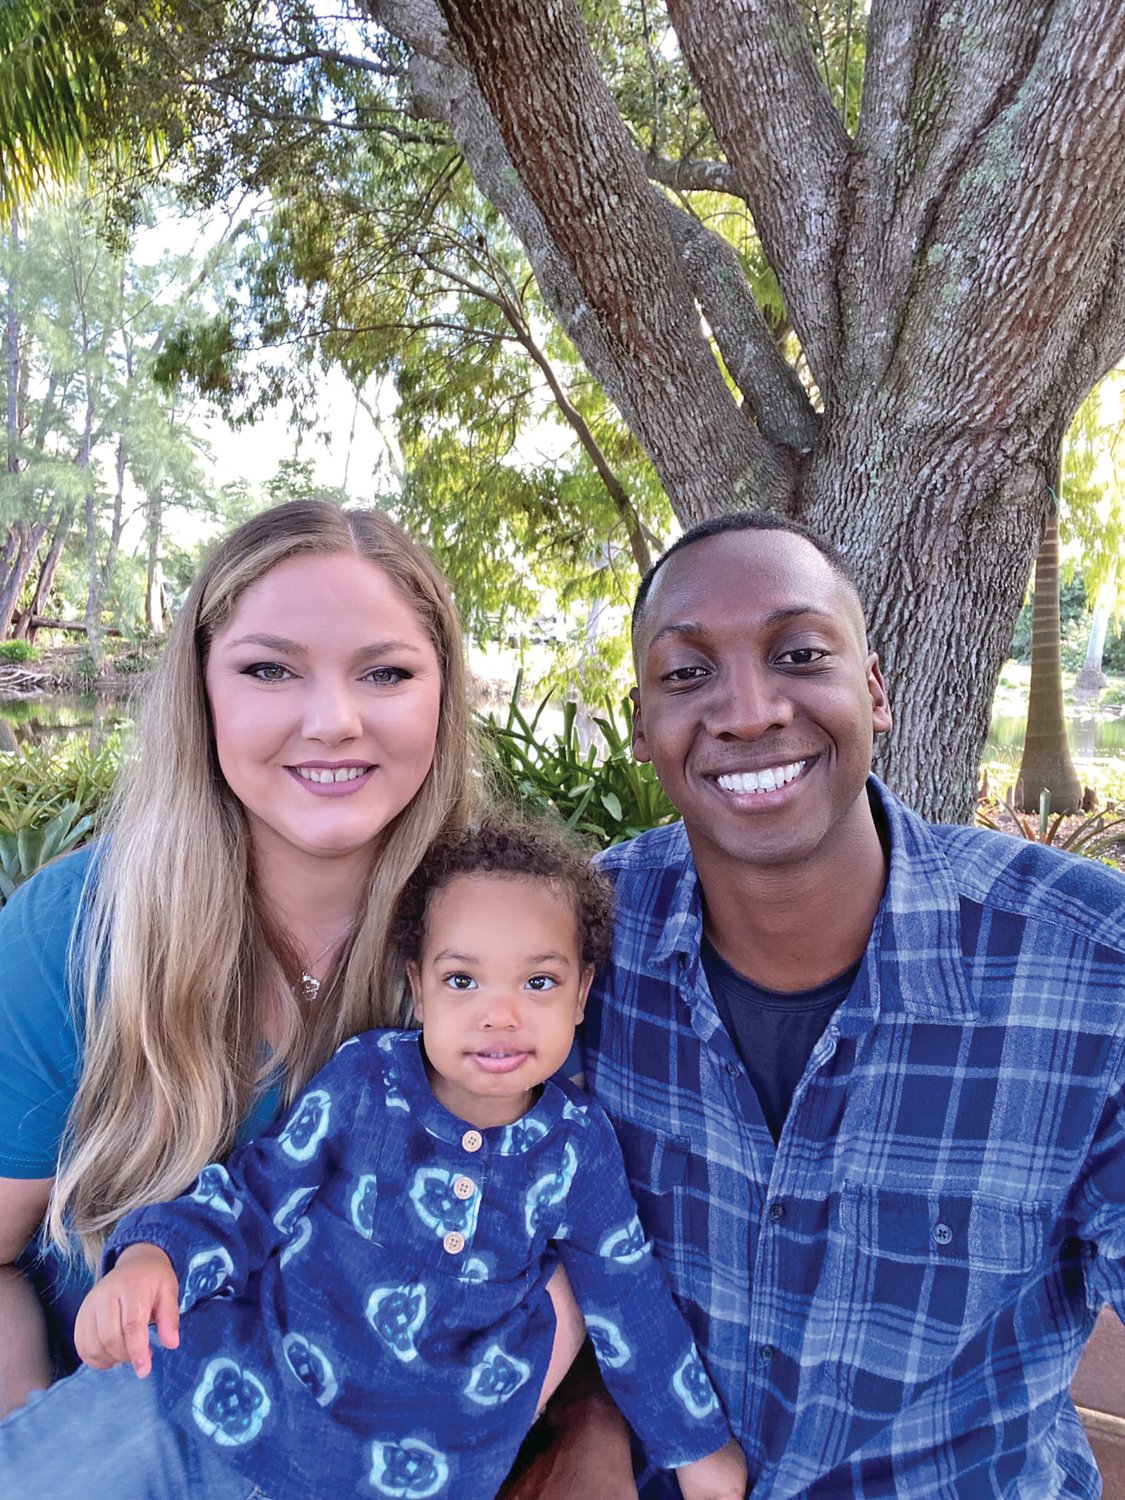 Jerome and Aspen Jackson with their child.